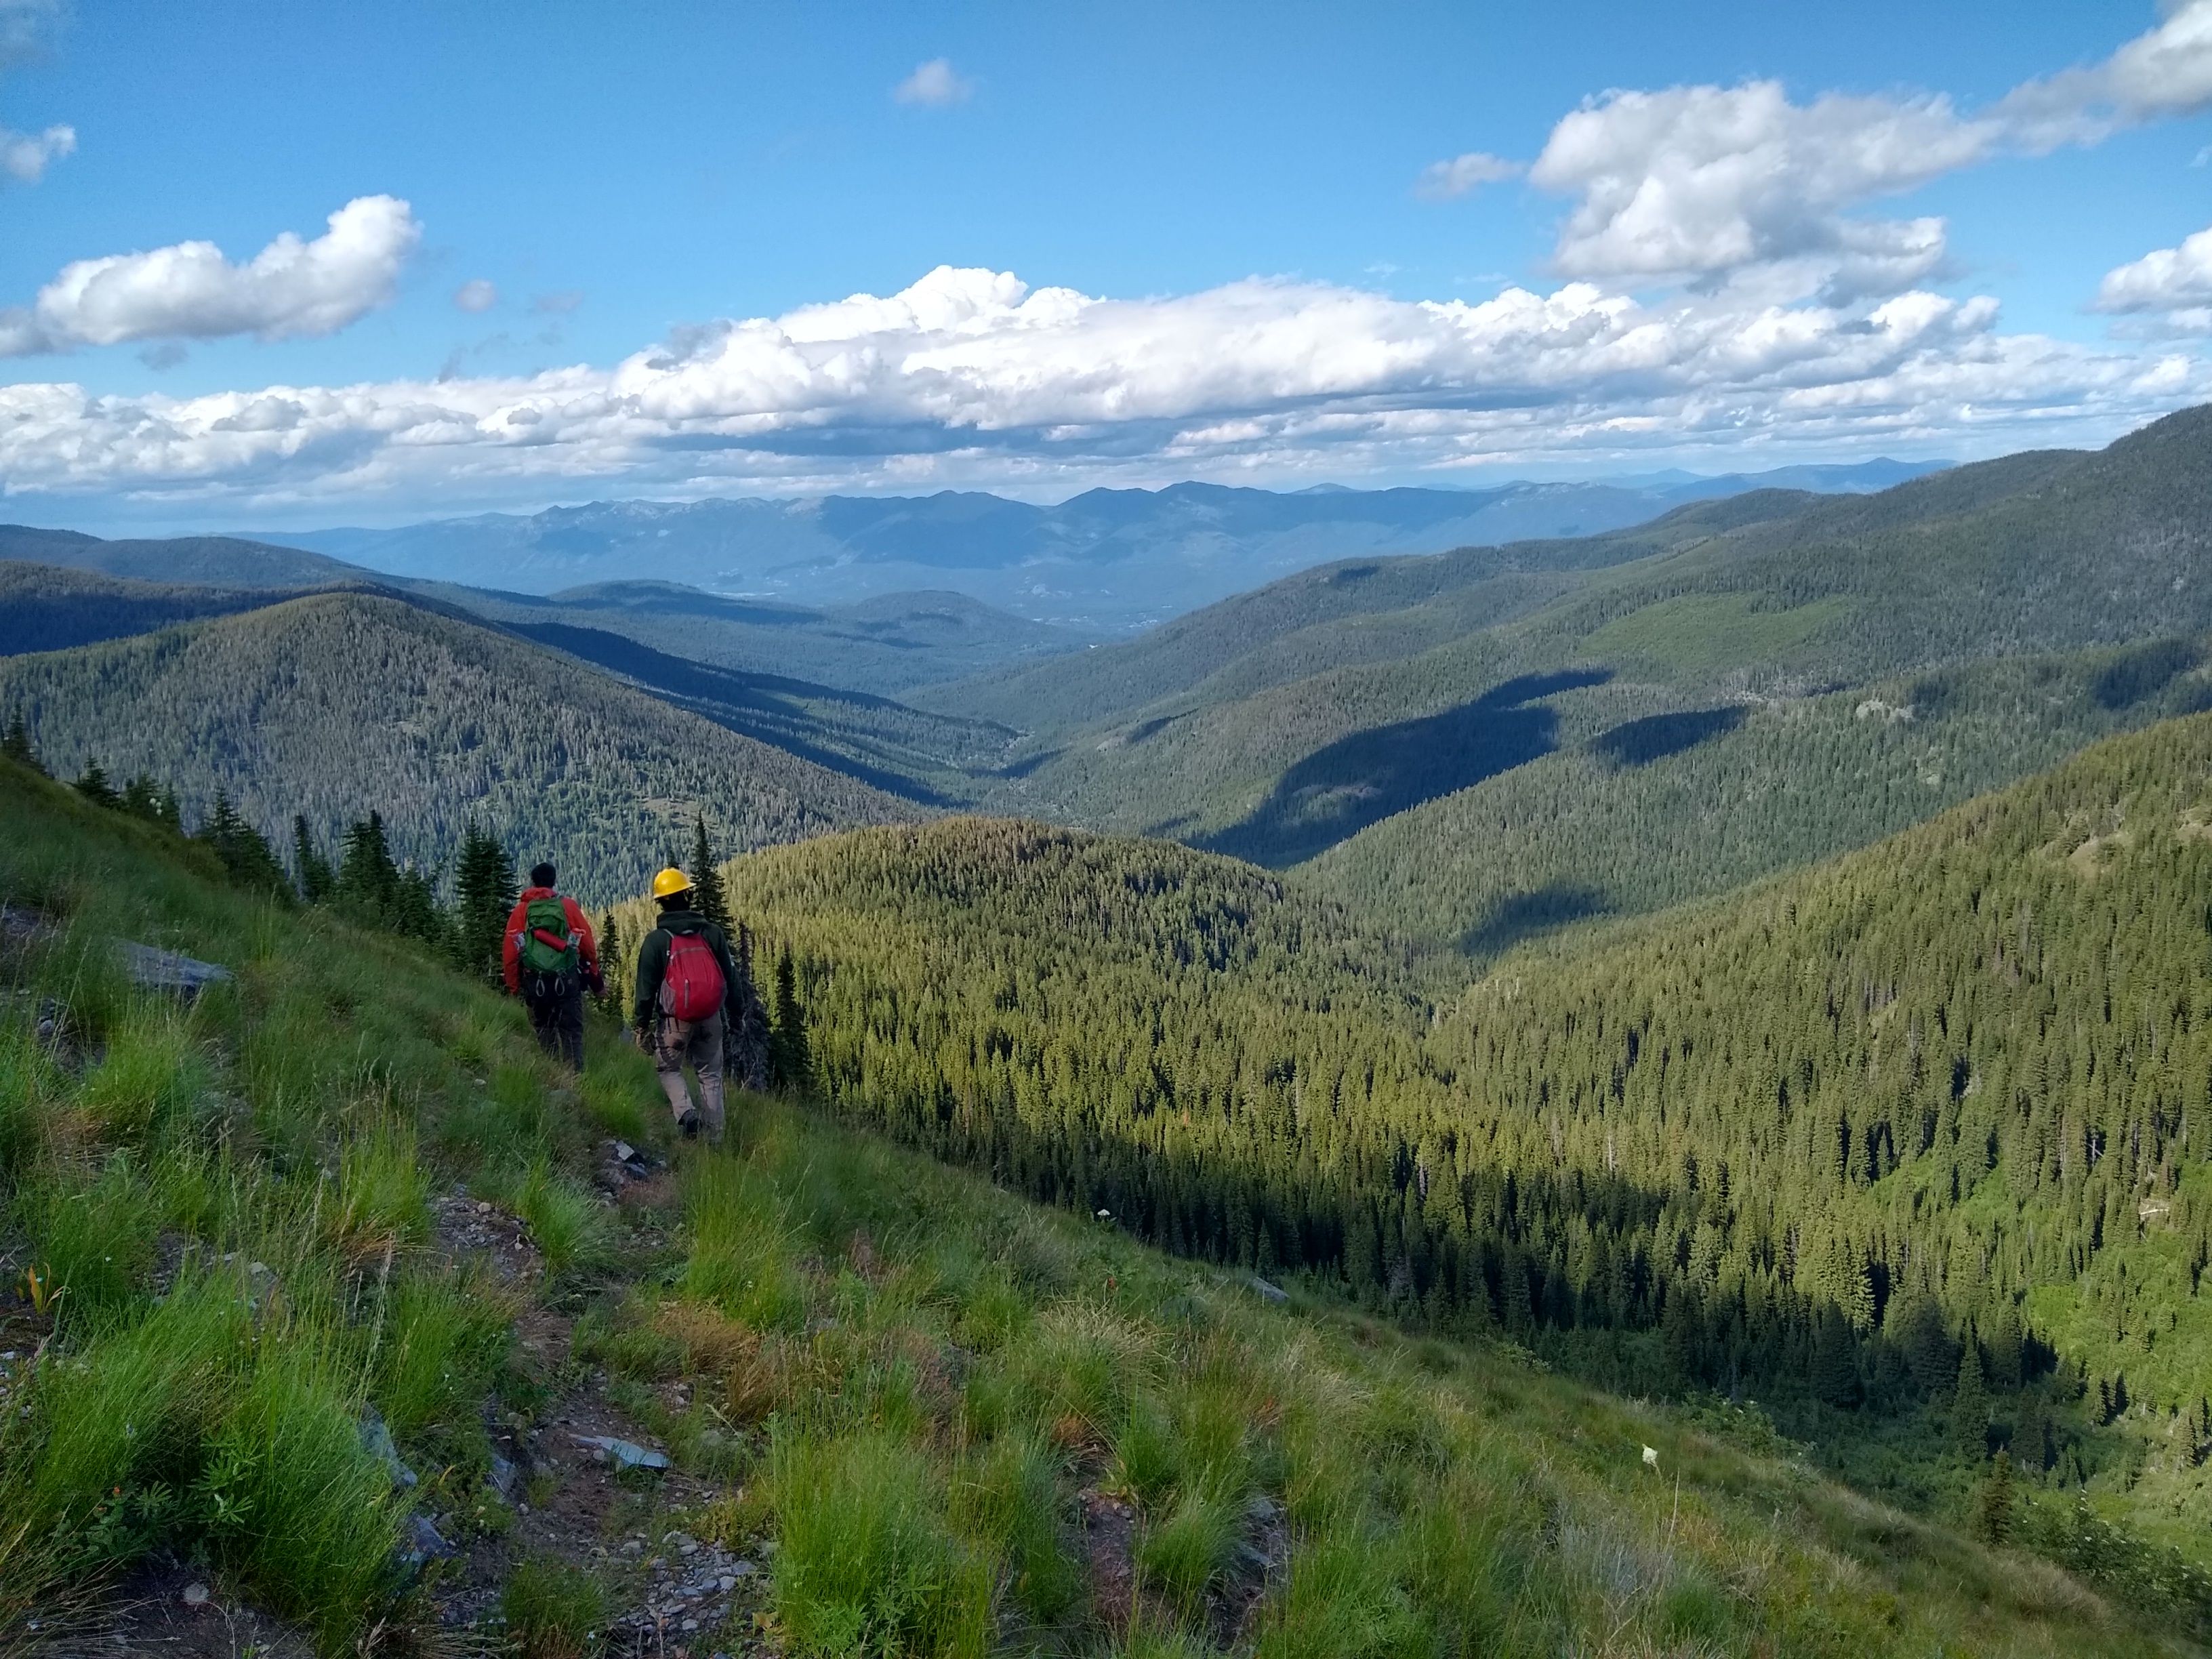 [Image Description: Two MCC members are walking away on the trail, looking out over a lush, green valley.]